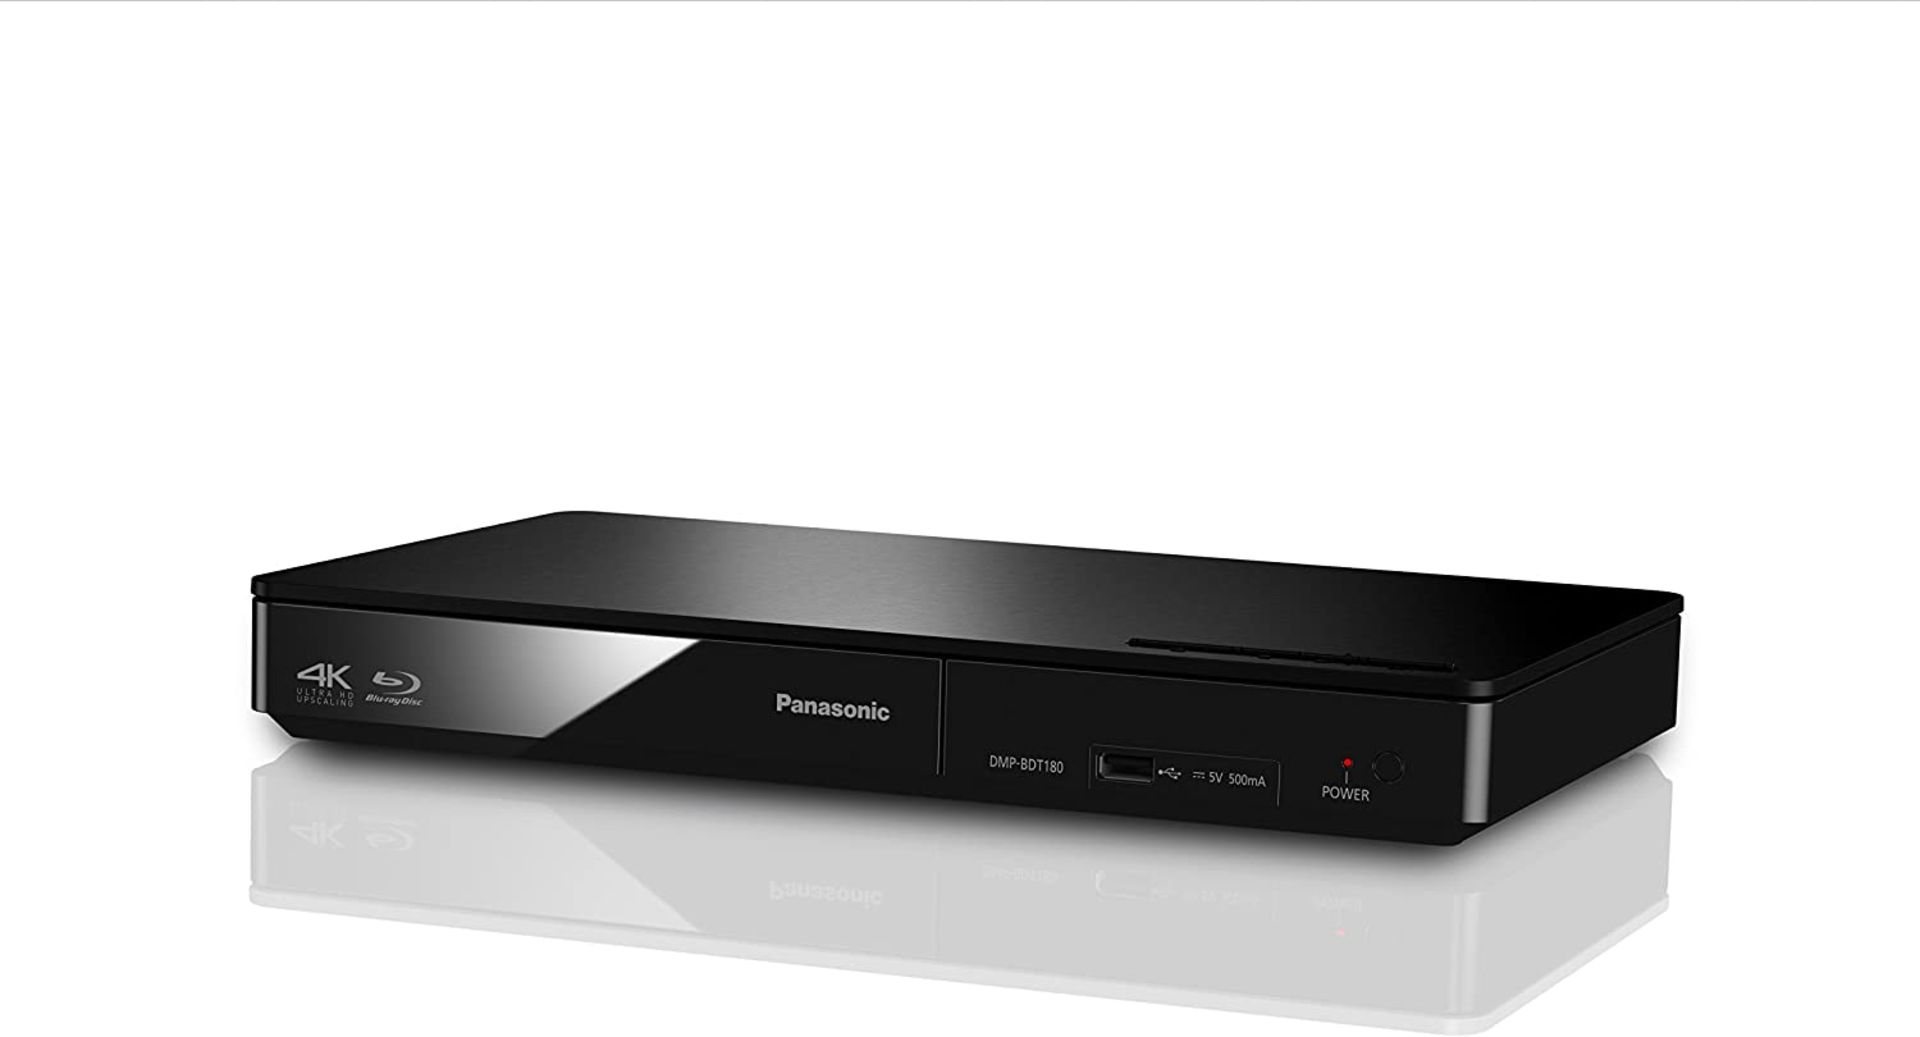 (M7) Panasonic DMP-BDT180EB 3D Smart Blu-Ray Player - Black Experience the high picture quality... - Image 2 of 3